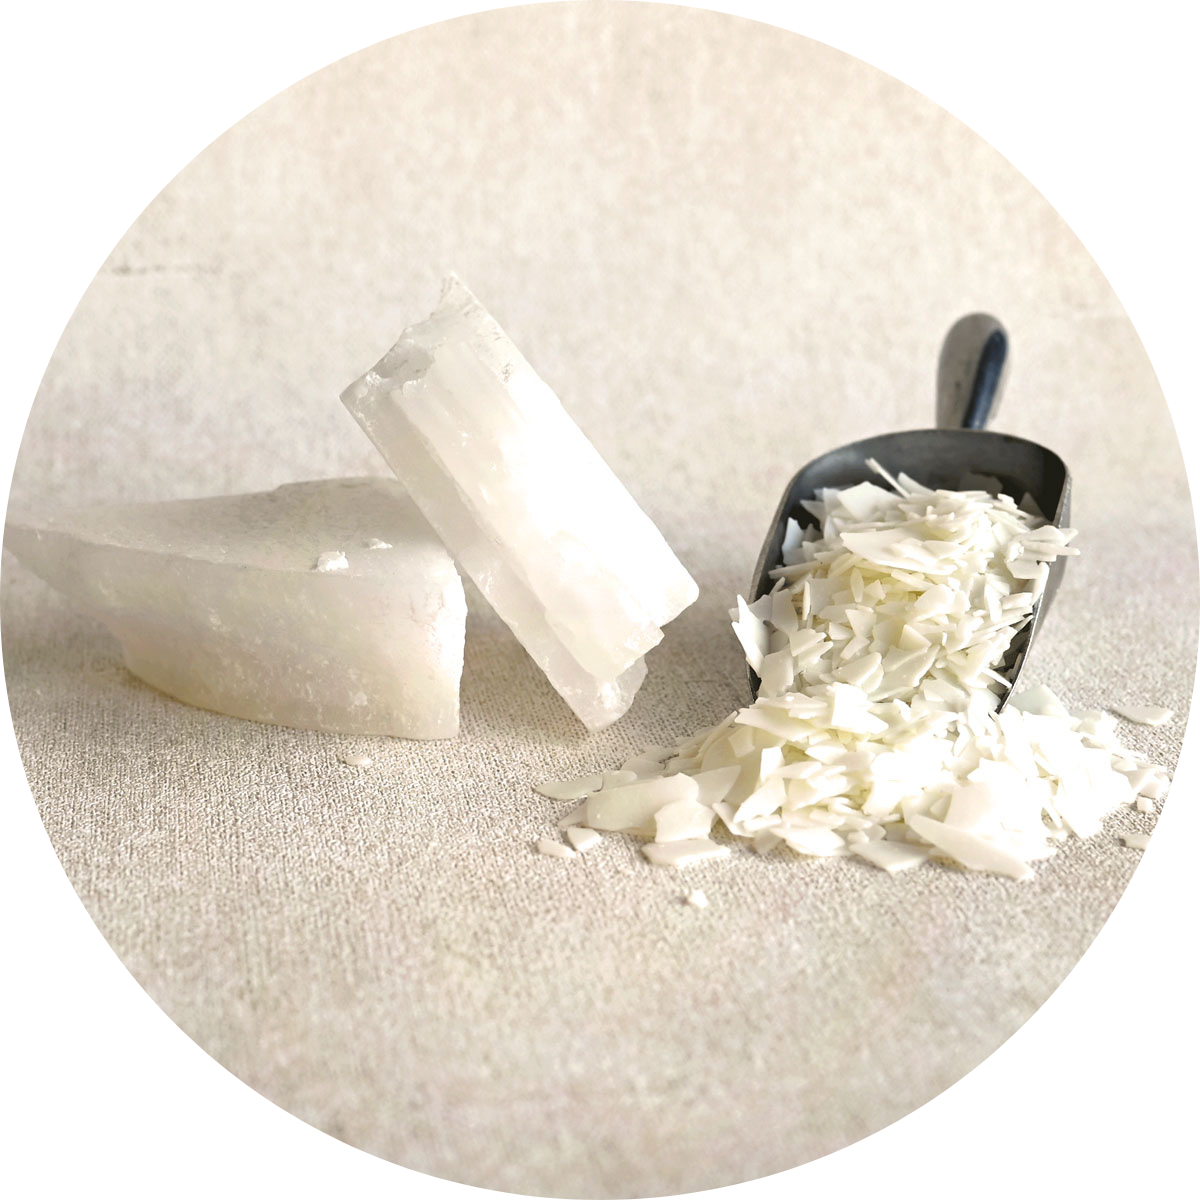 Coconut Candle Wax - Bulk and Wholesale